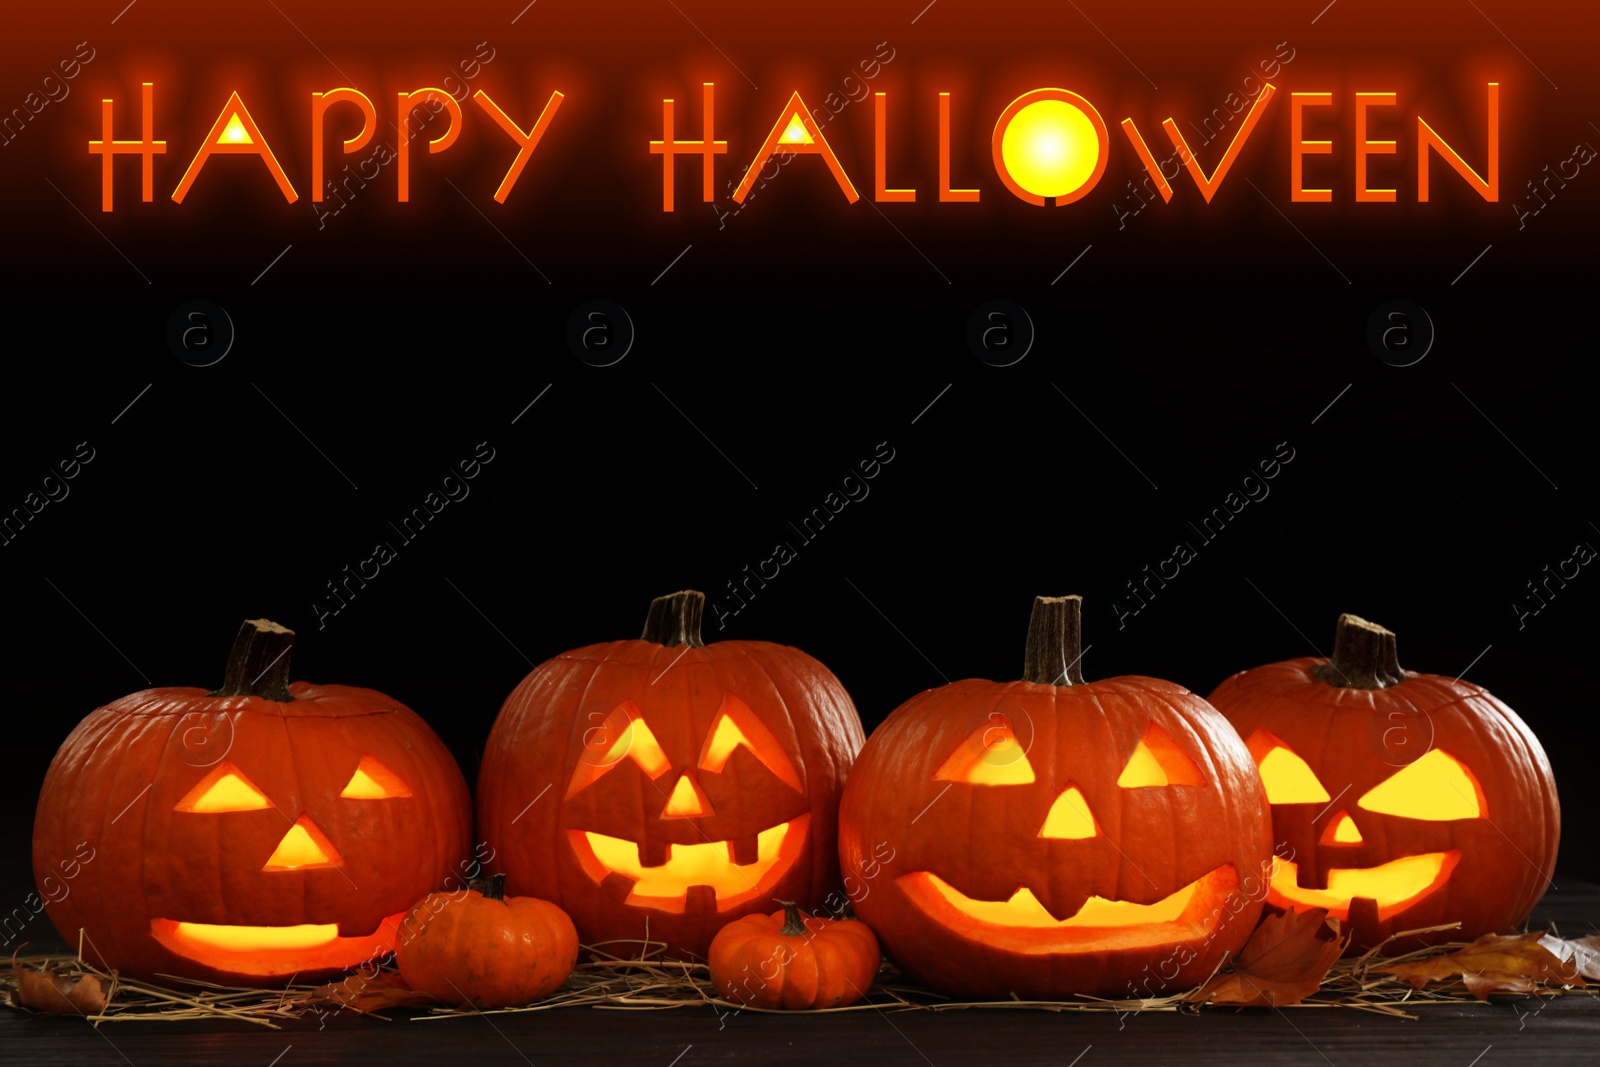 Image of Happy Halloween. Glowing Jack O'lanterns on table in darkness